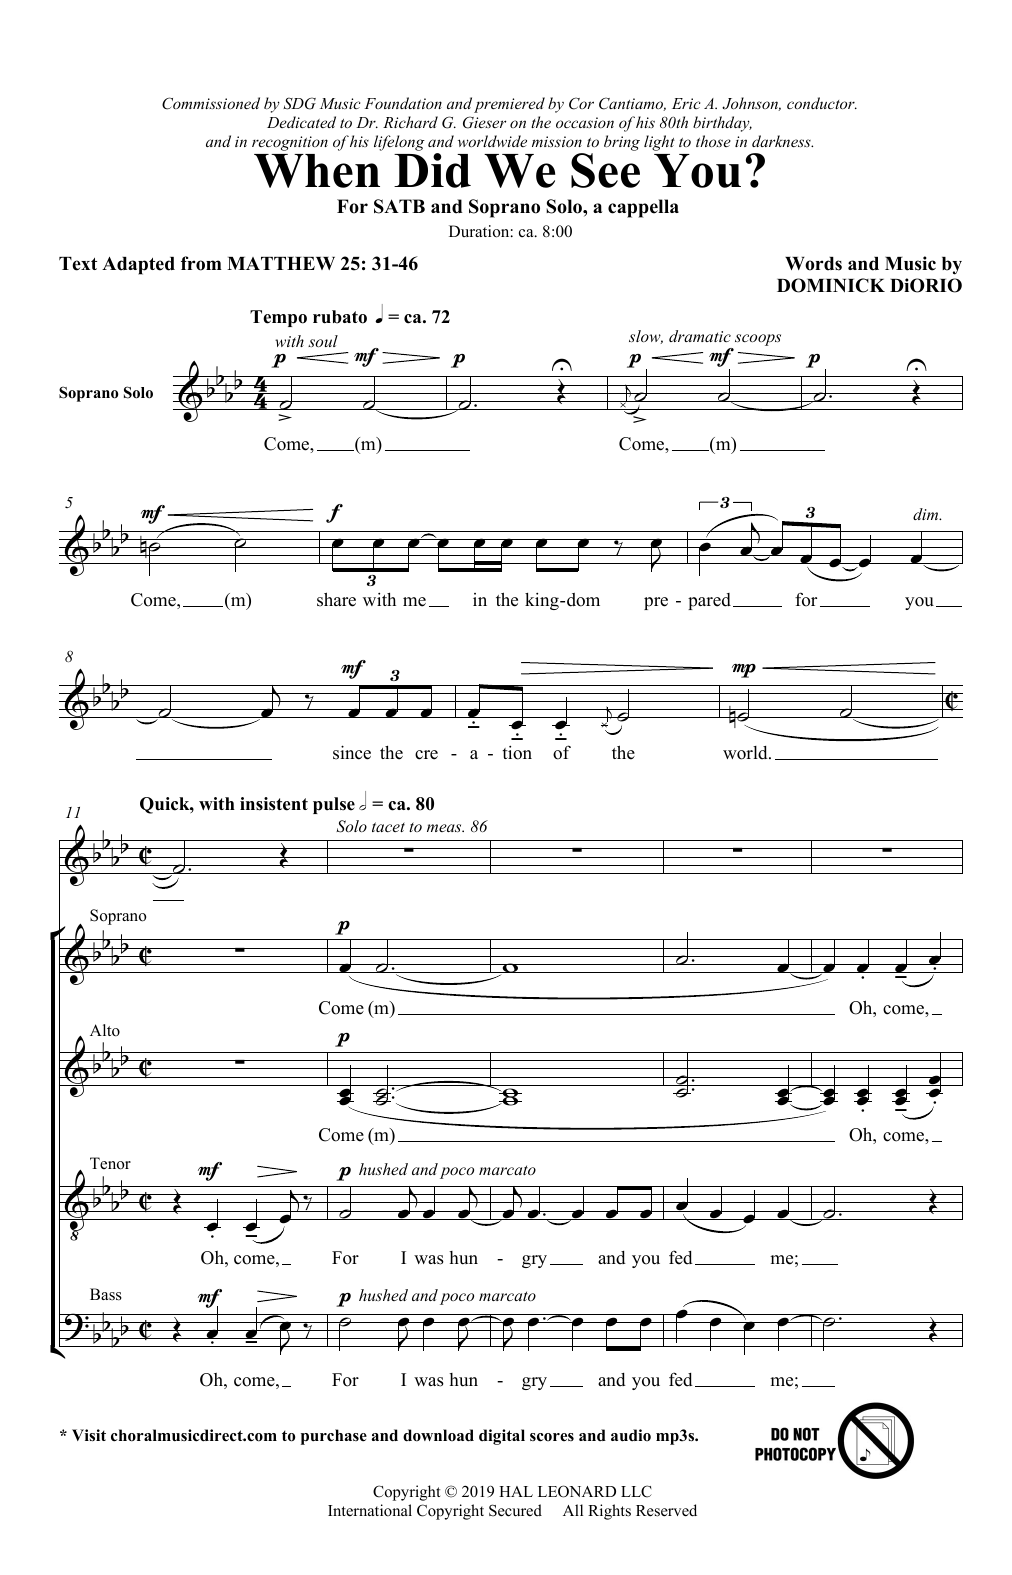 Download Dominick DiOrio When Did We See You? Sheet Music